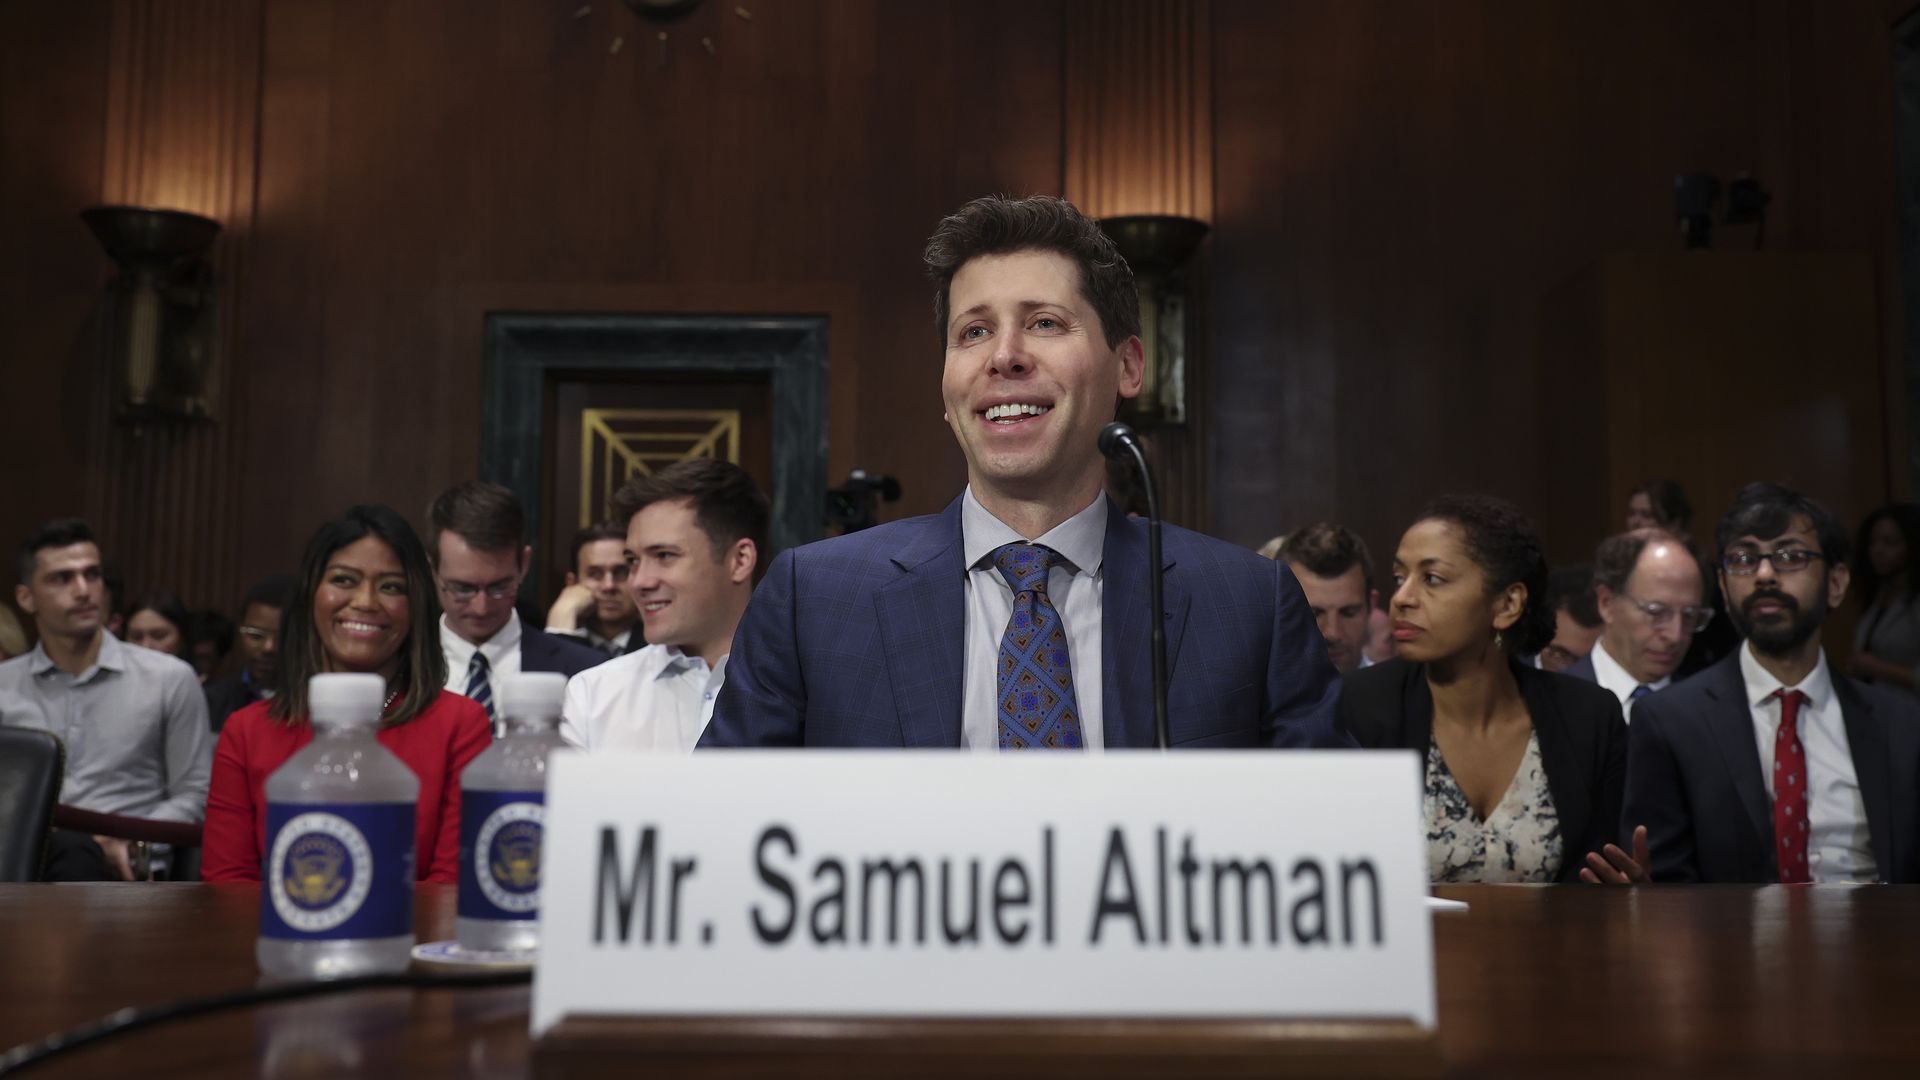 Photo of Sam Altman in suit and tie smiling, seated at testimony table, with a placard bearing his name